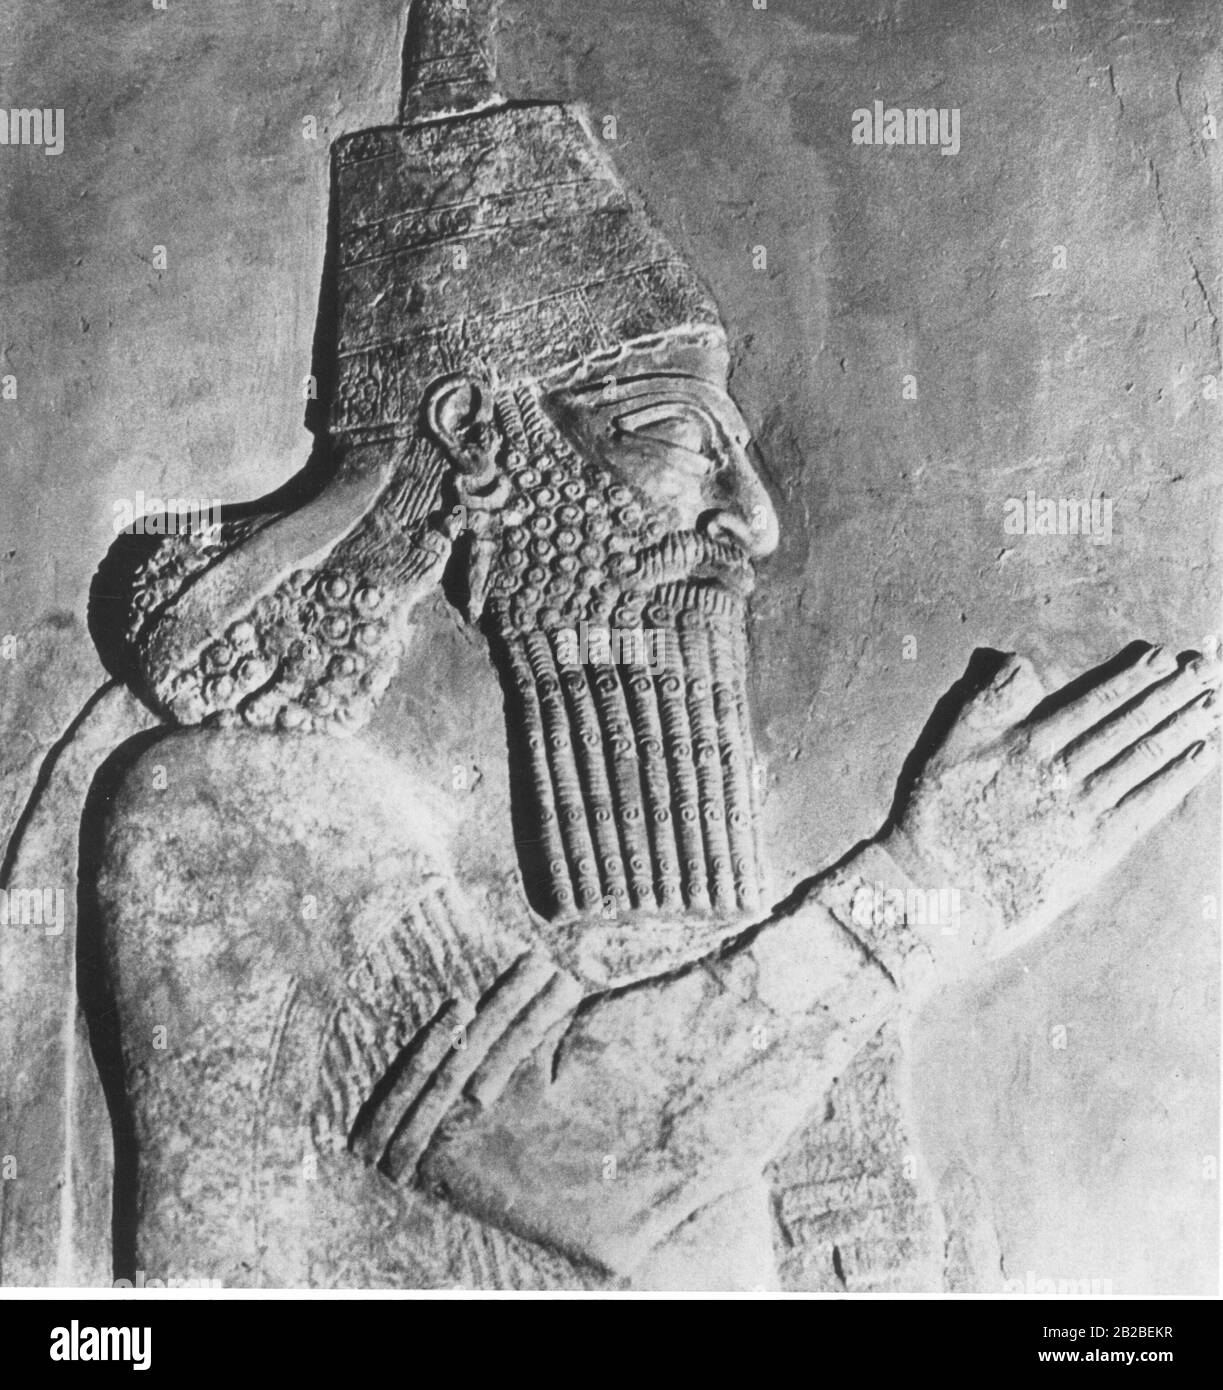 King Sargon II (721 - 705 BC), shown on a typical Assyrian relief from the Royal Palace of Dur-Sharrukin (Khorsabad). The relief is again not a portrait of the king, but a conventional representation of an Assyrian ruler. Stock Photo